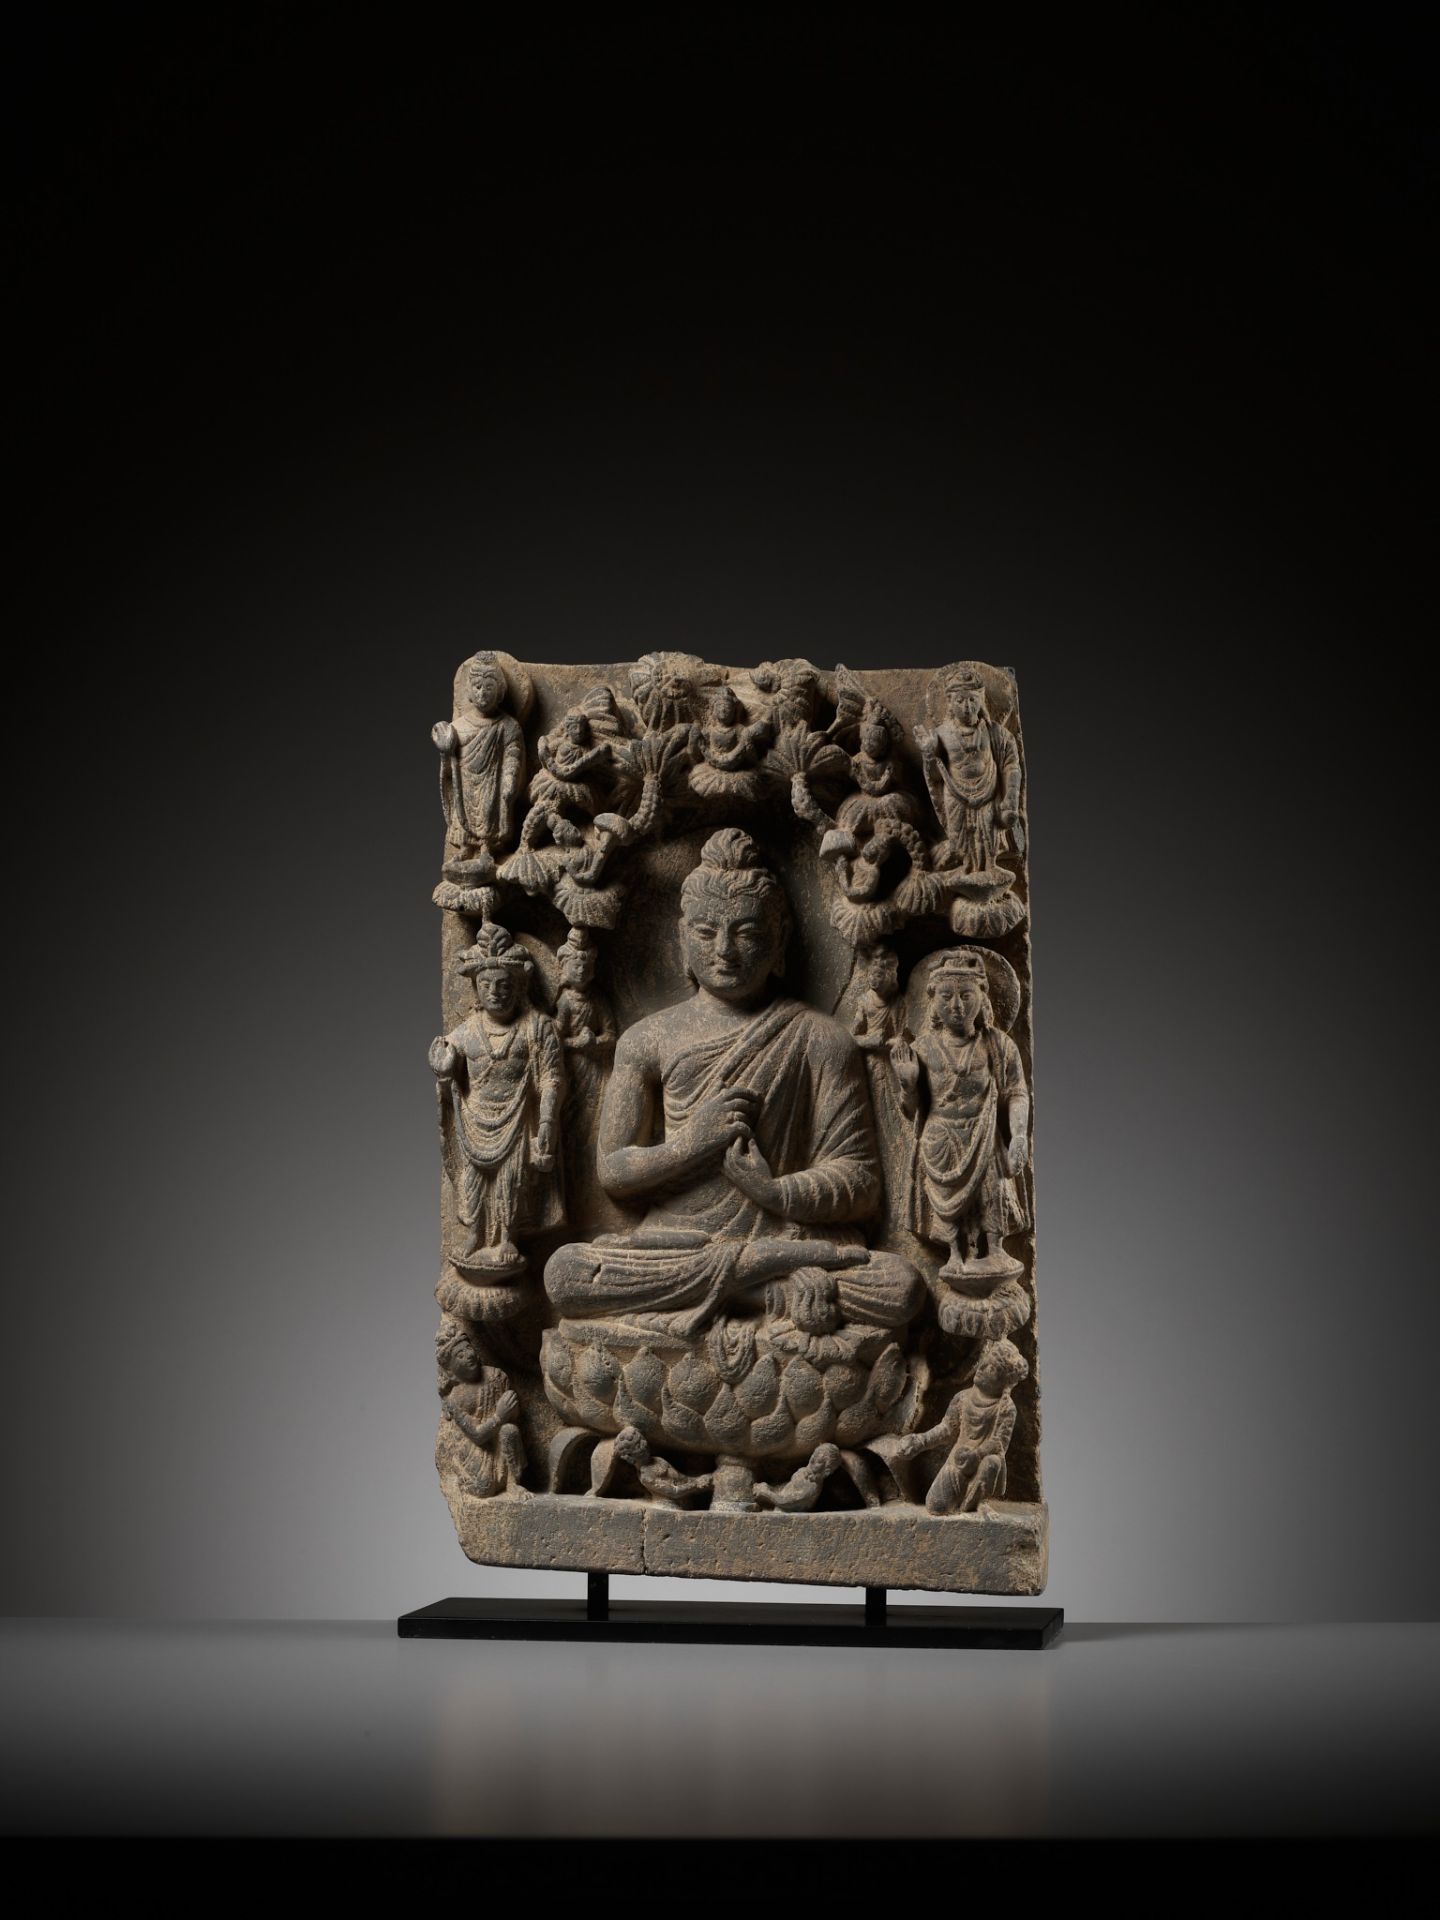 A SCHIST STELE DEPICTING BUDDHA, ANCIENT REGION OF GANDHARA, 3RD-4TH CENTURY - Image 2 of 11